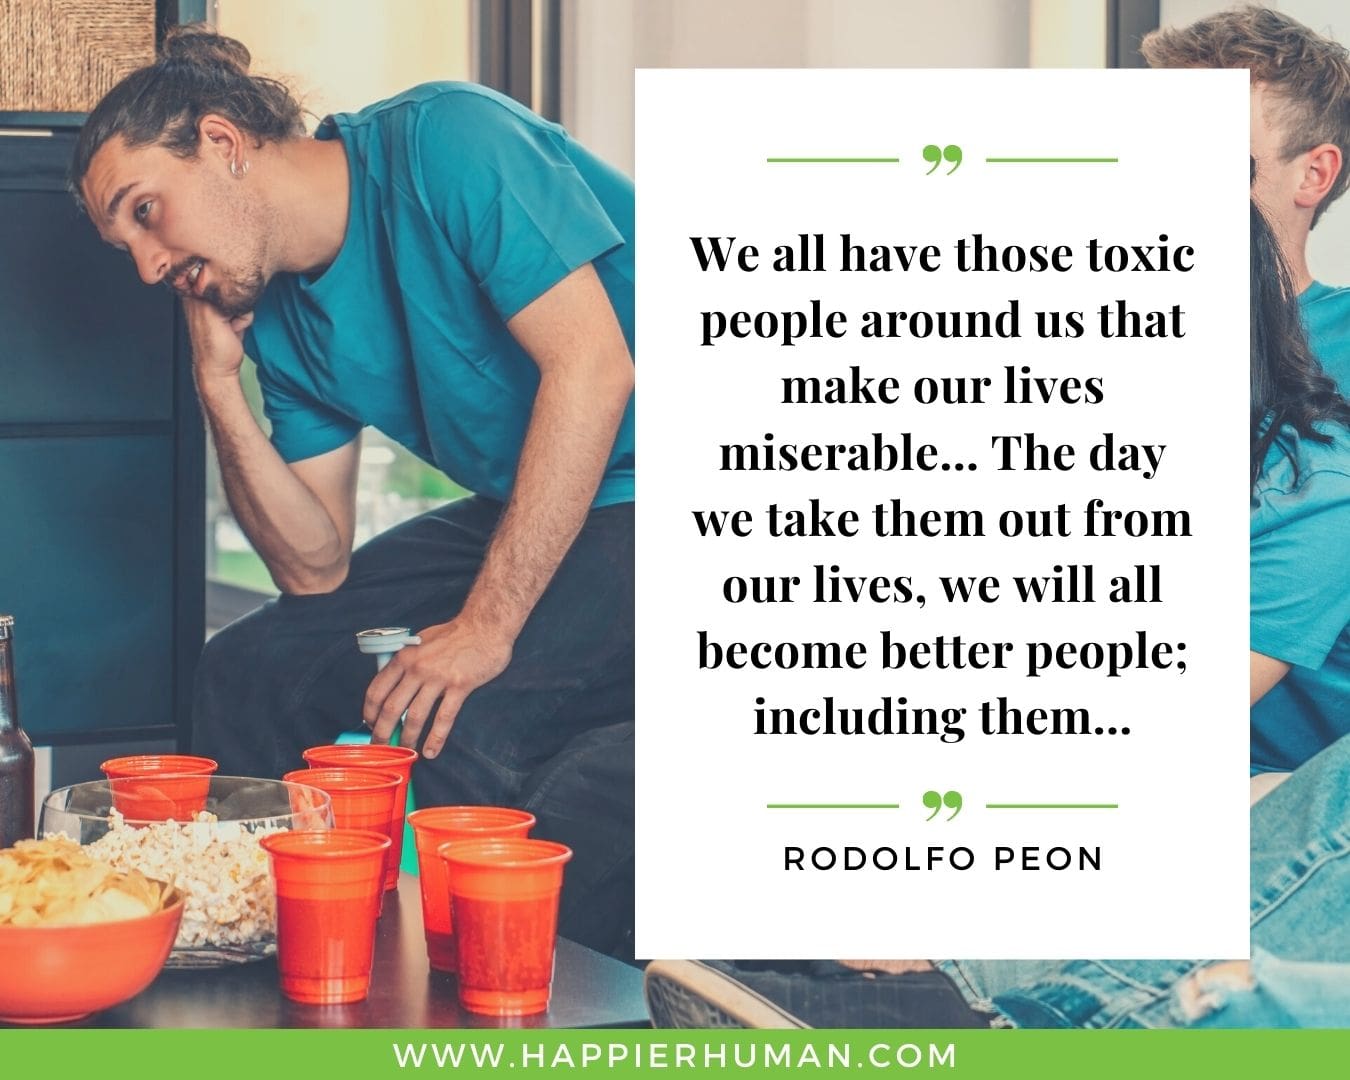 Toxic People Quotes - “We all have those toxic people around us that make our lives miserable… The day we take them out from our lives, we will all become better people; including them…” – Rodolfo Peon